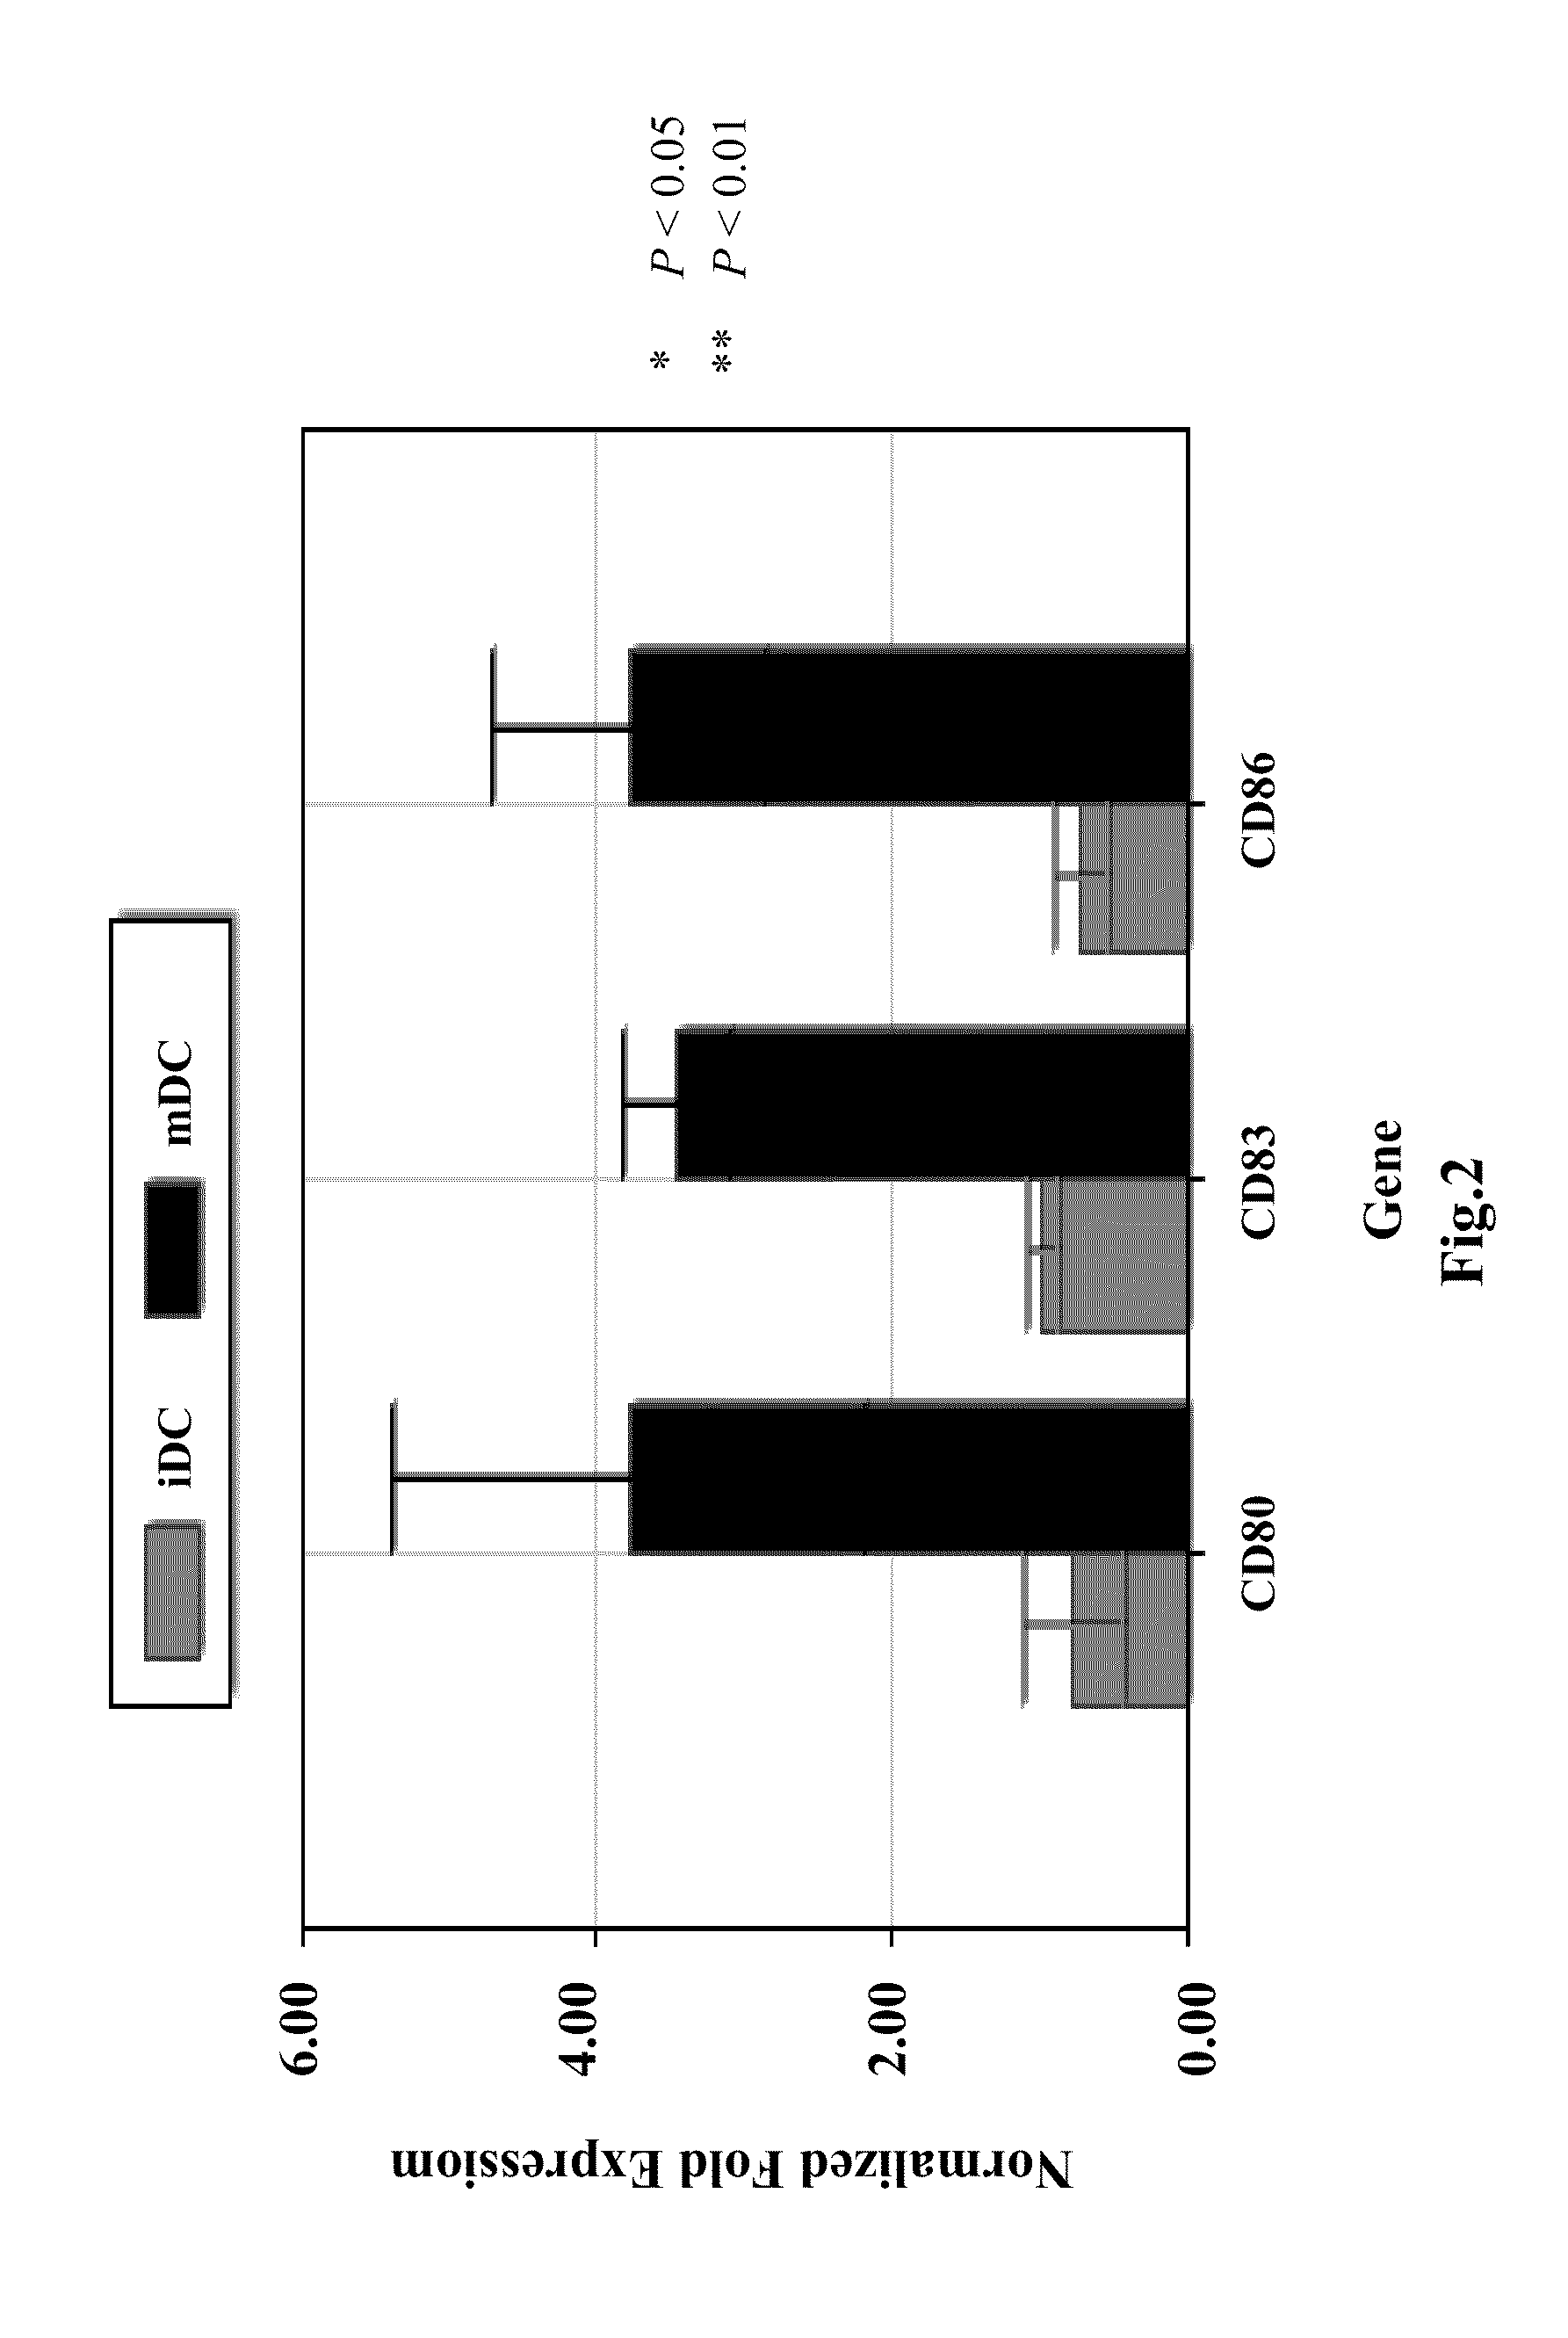 Canine tumor cell and allogeneic dendritic cell fused vaccine and method for preparing the same